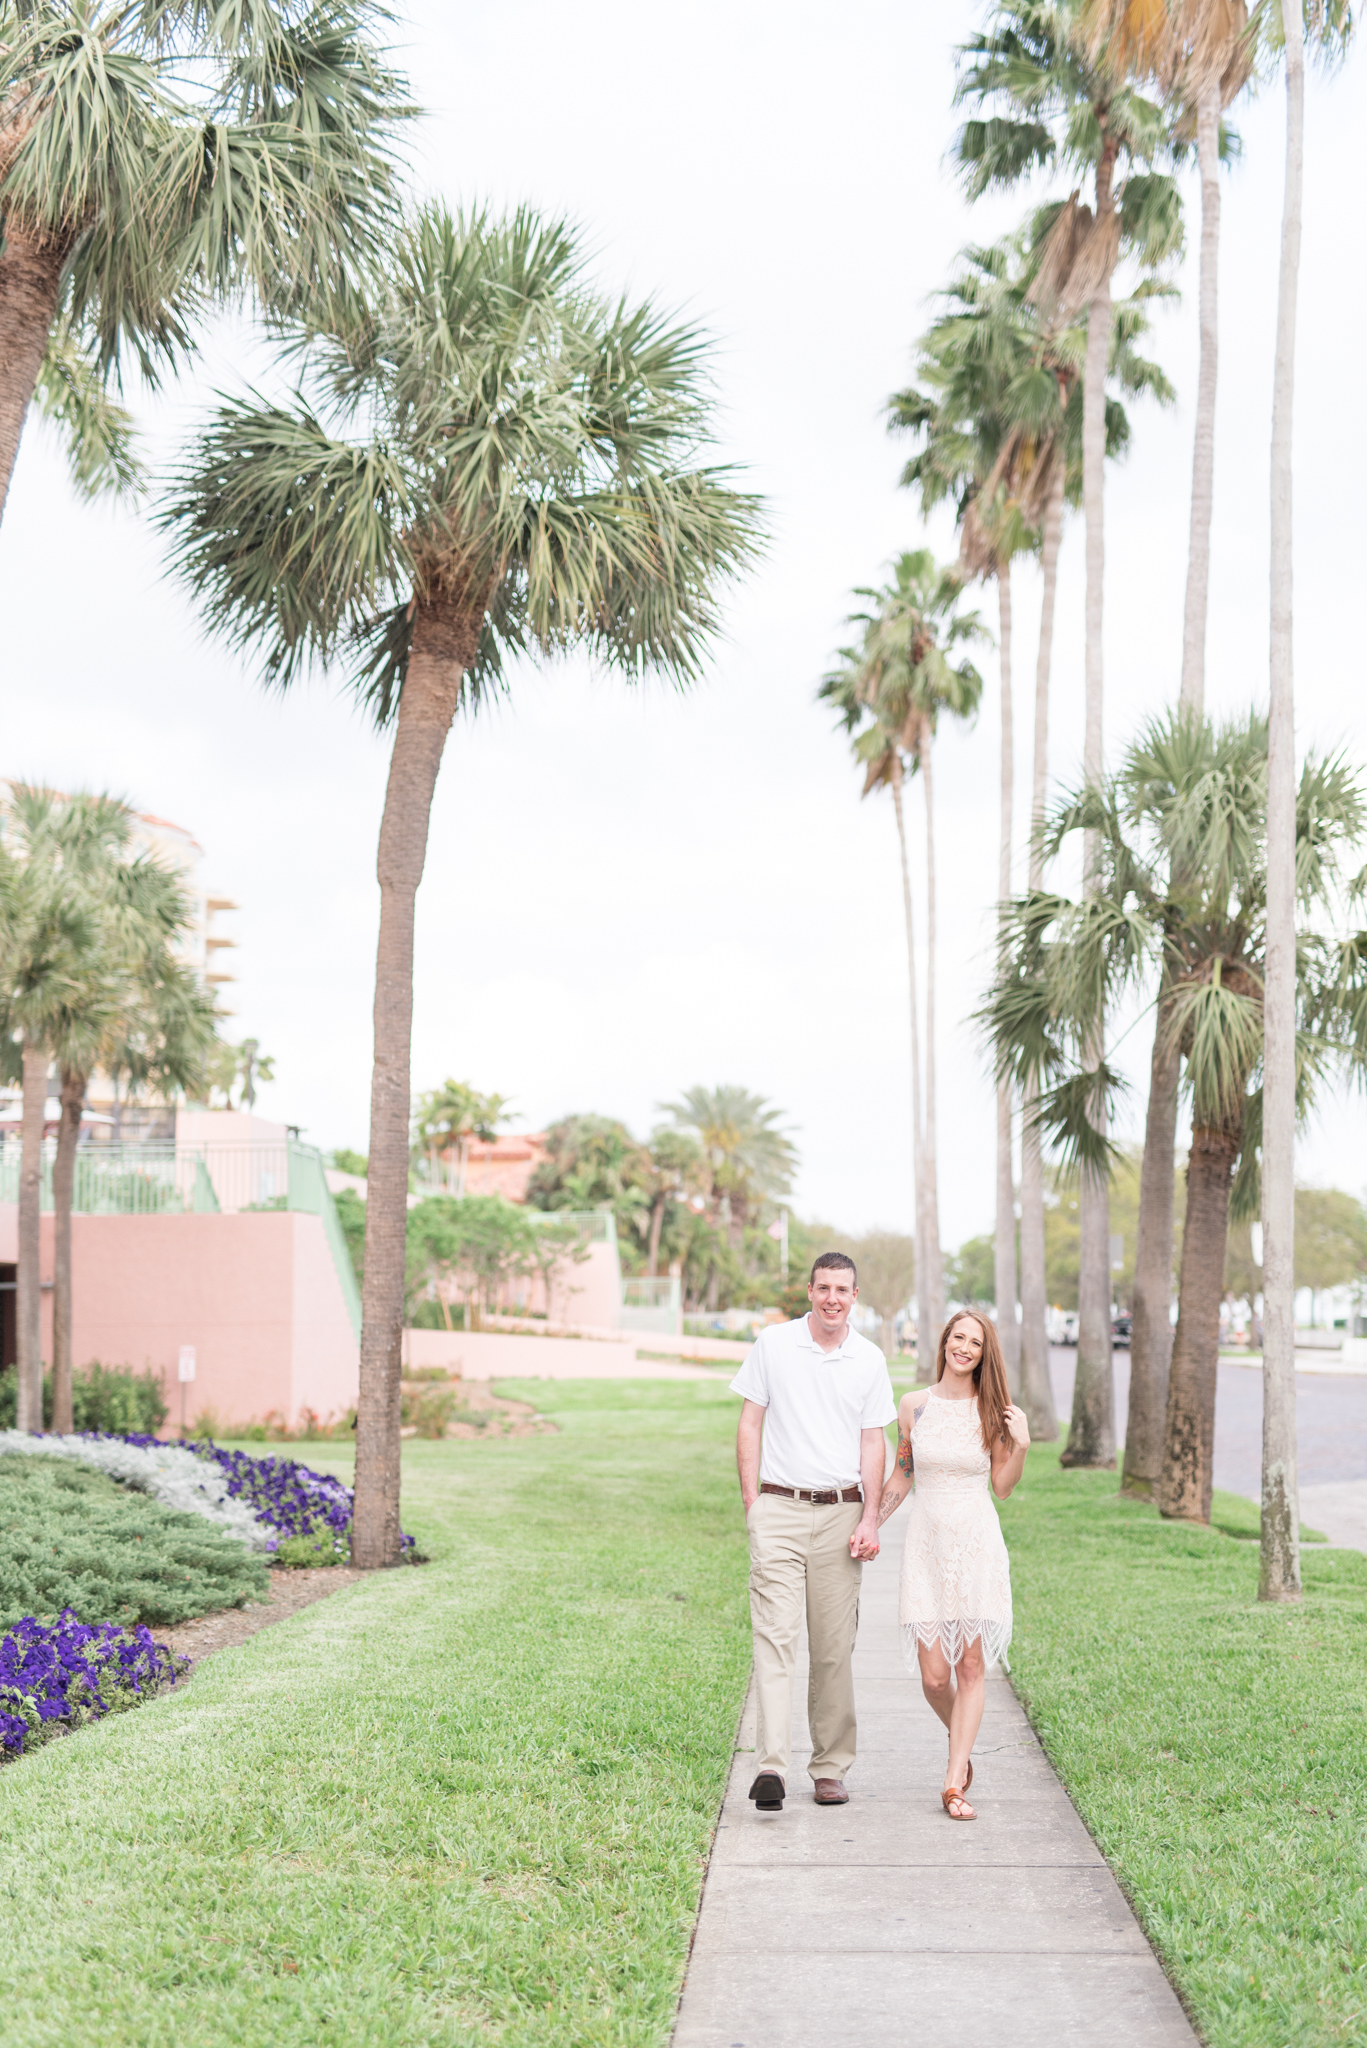 Man and woman walk in between palm trees.